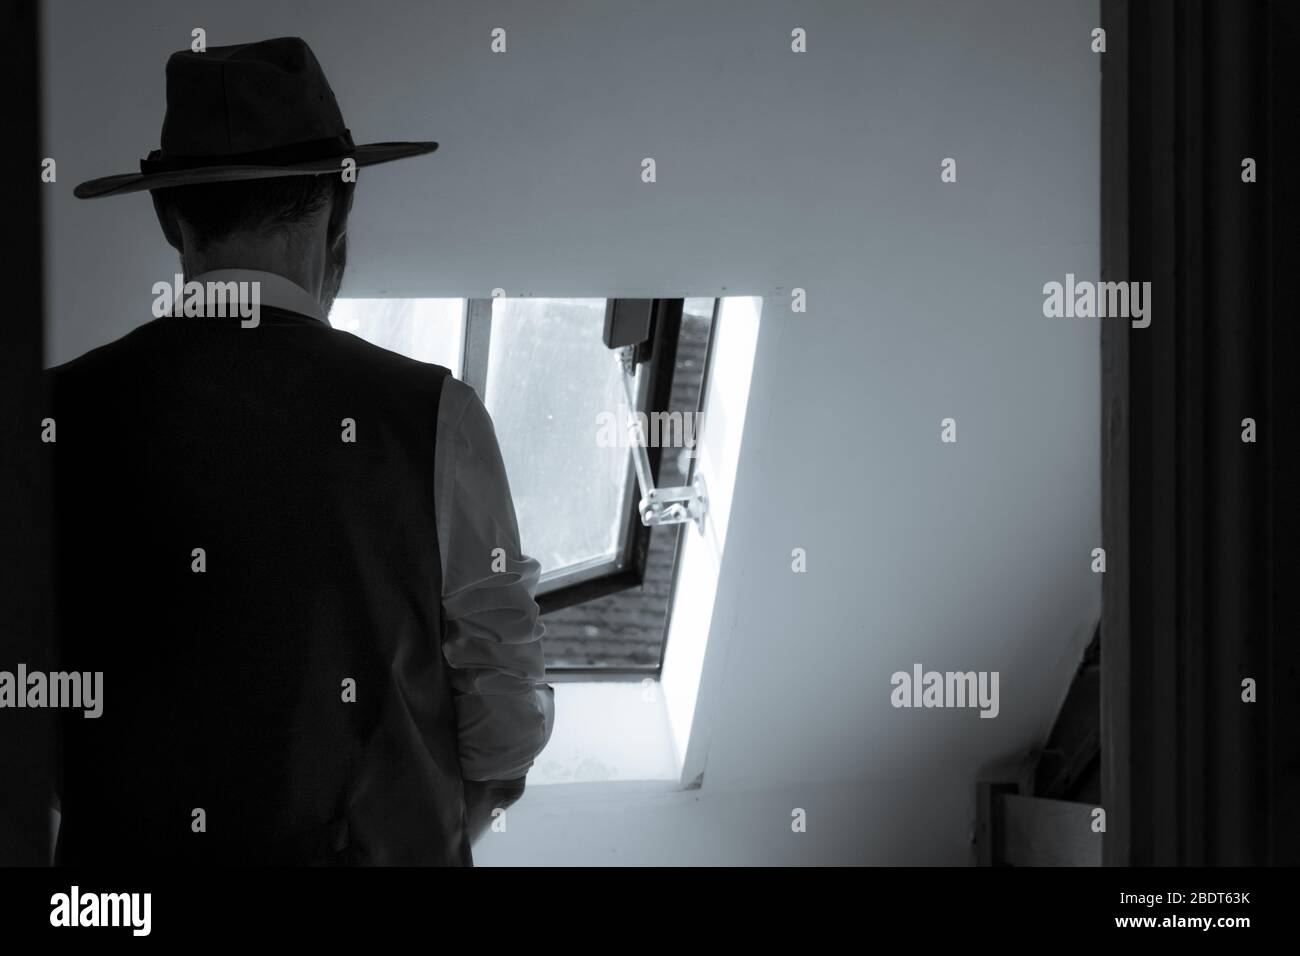 A man looking out of a window, back to camera, wearing a waistcoat and fedora hat. With a classic black and white edit Stock Photo